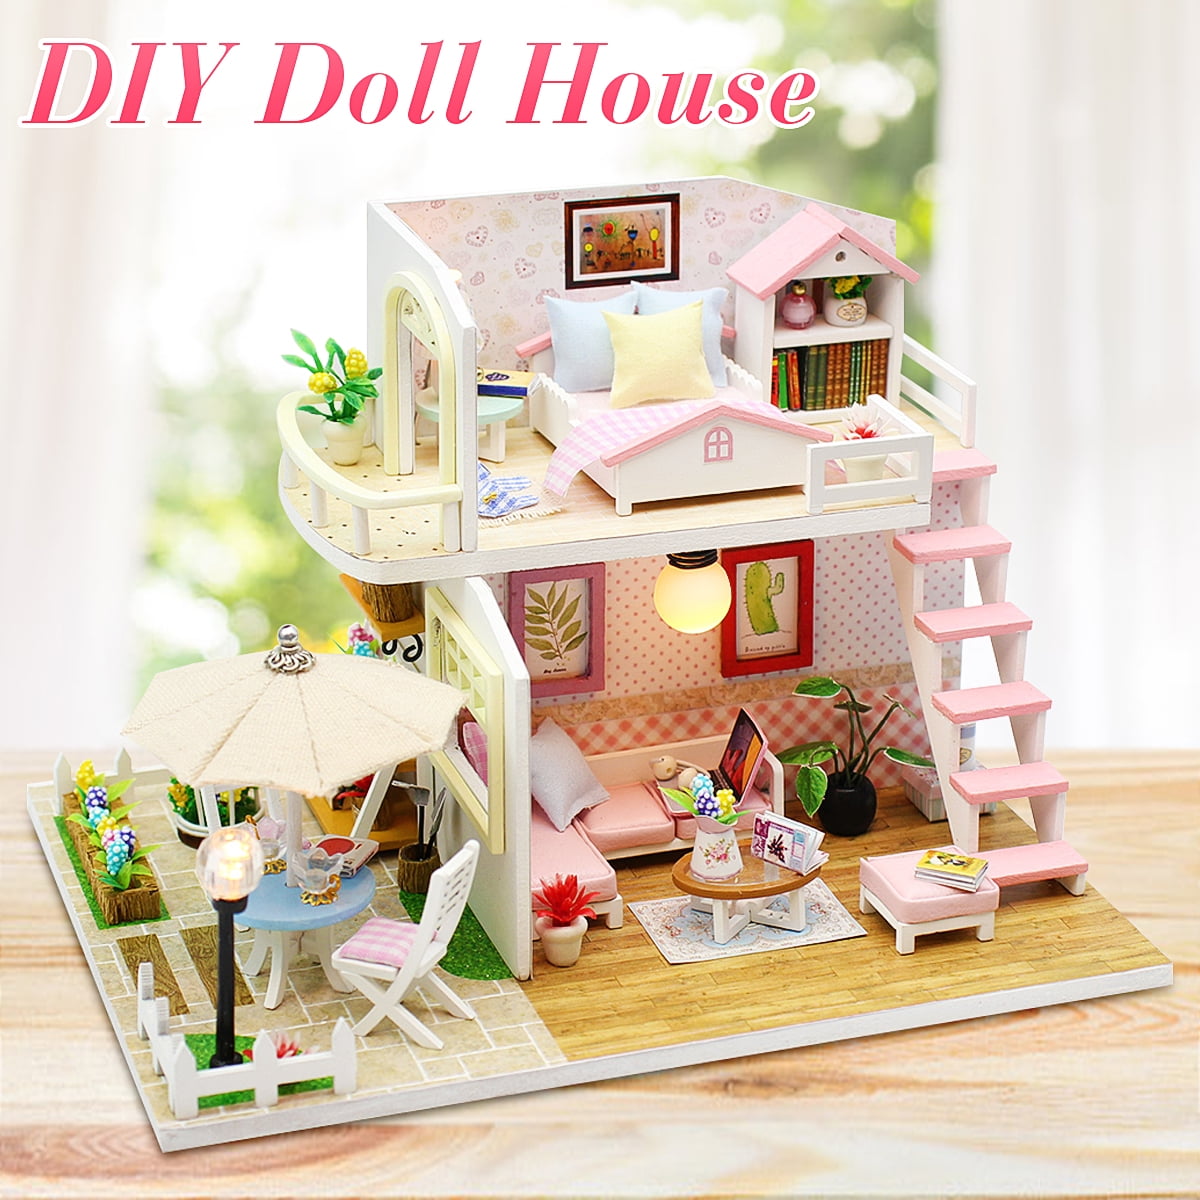 Details about   Kids Furniture Kits DIY Doll House With LED Light Grown Up Wood Material Toy New 